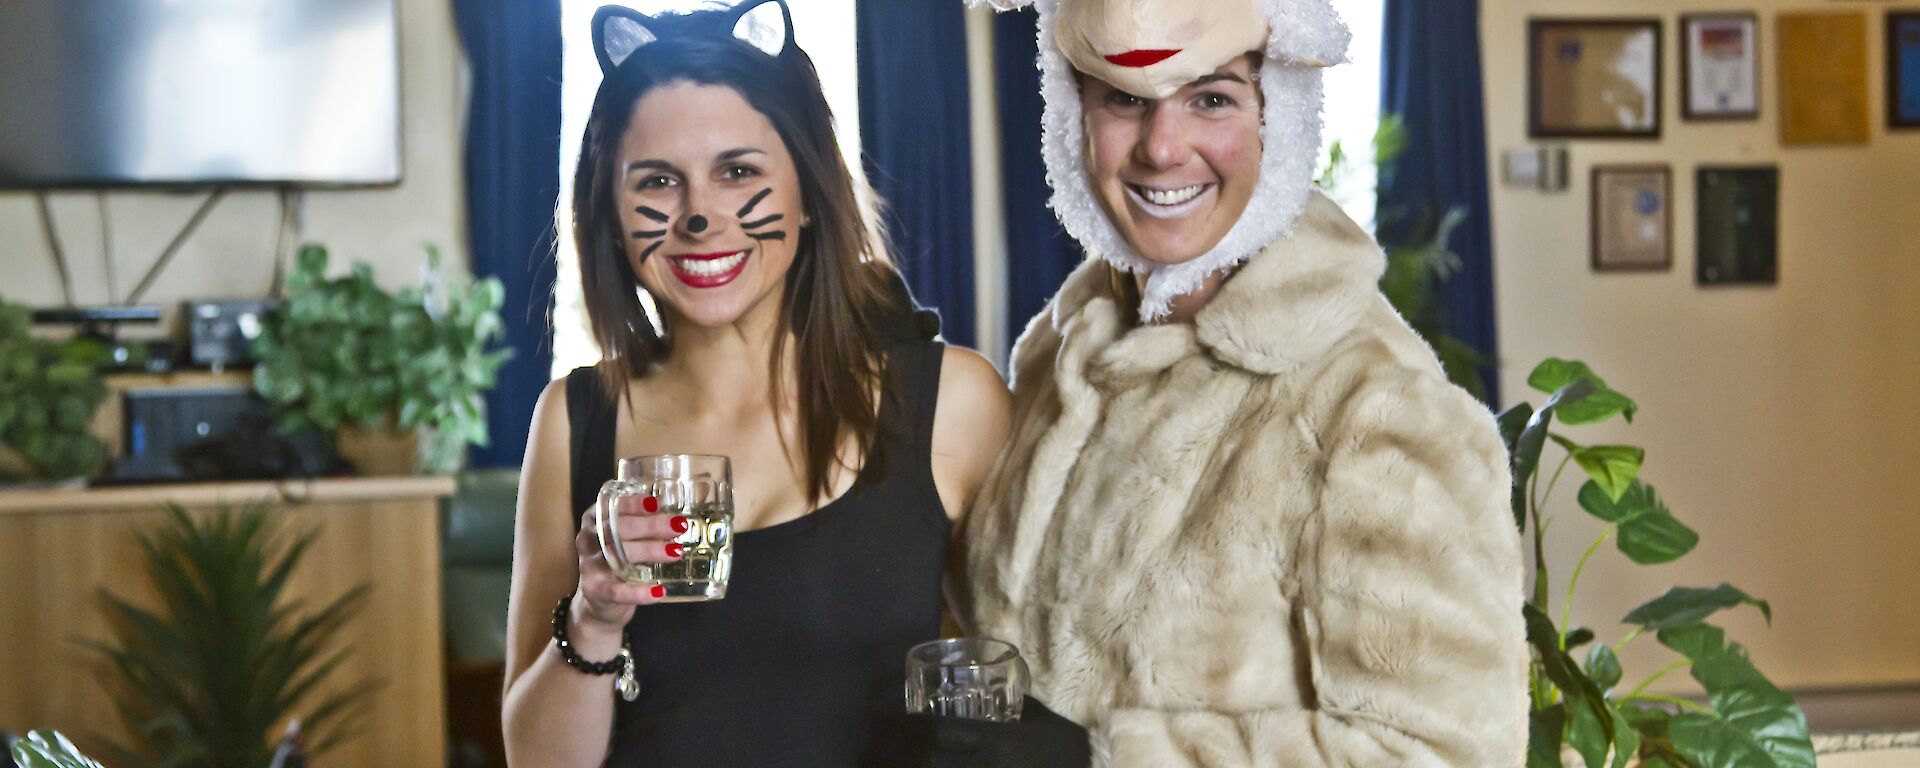 Danielle dressed as a black cat and Belinda dressed as a sheep